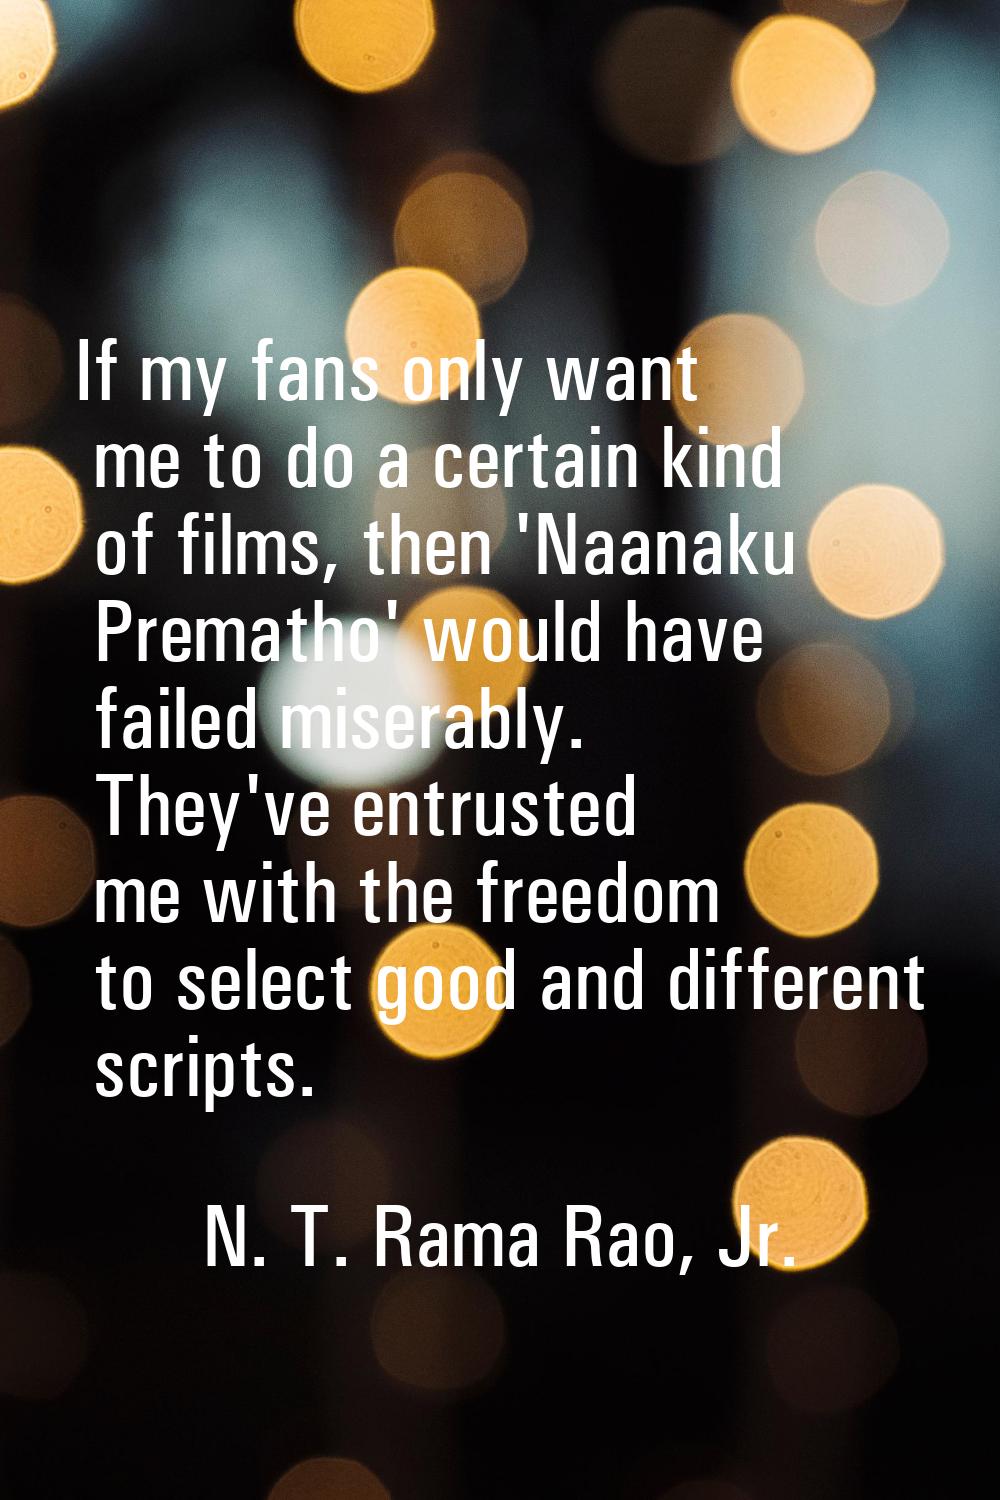 If my fans only want me to do a certain kind of films, then 'Naanaku Prematho' would have failed mi